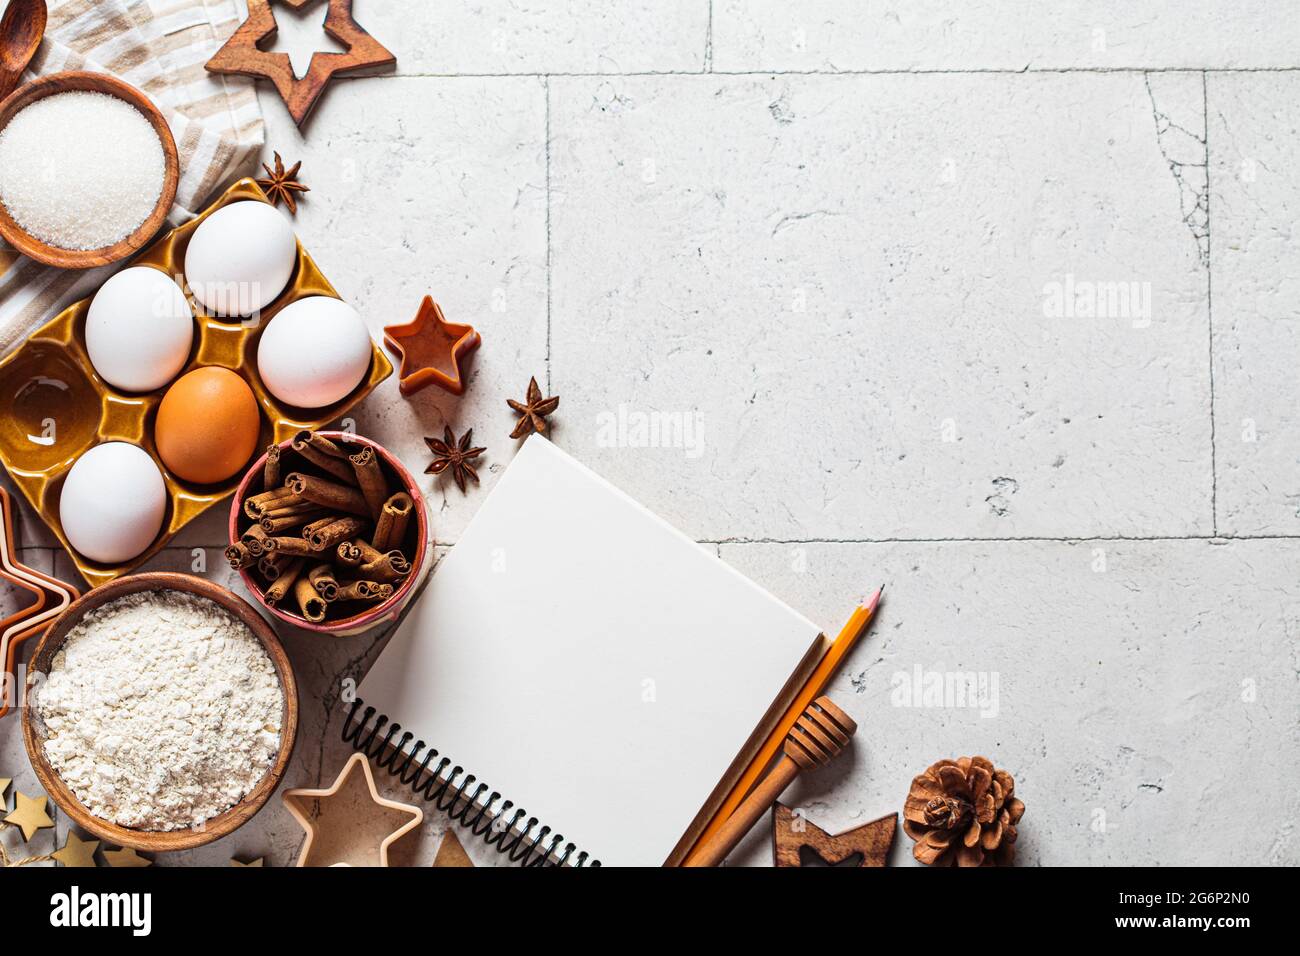 https://c8.alamy.com/comp/2G6P2N0/christmas-baking-concept-ingredients-for-christmas-cookies-on-gray-tiles-background-copy-space-flour-eggs-sugar-cinnamon-and-recipe-notebook-to-2G6P2N0.jpg